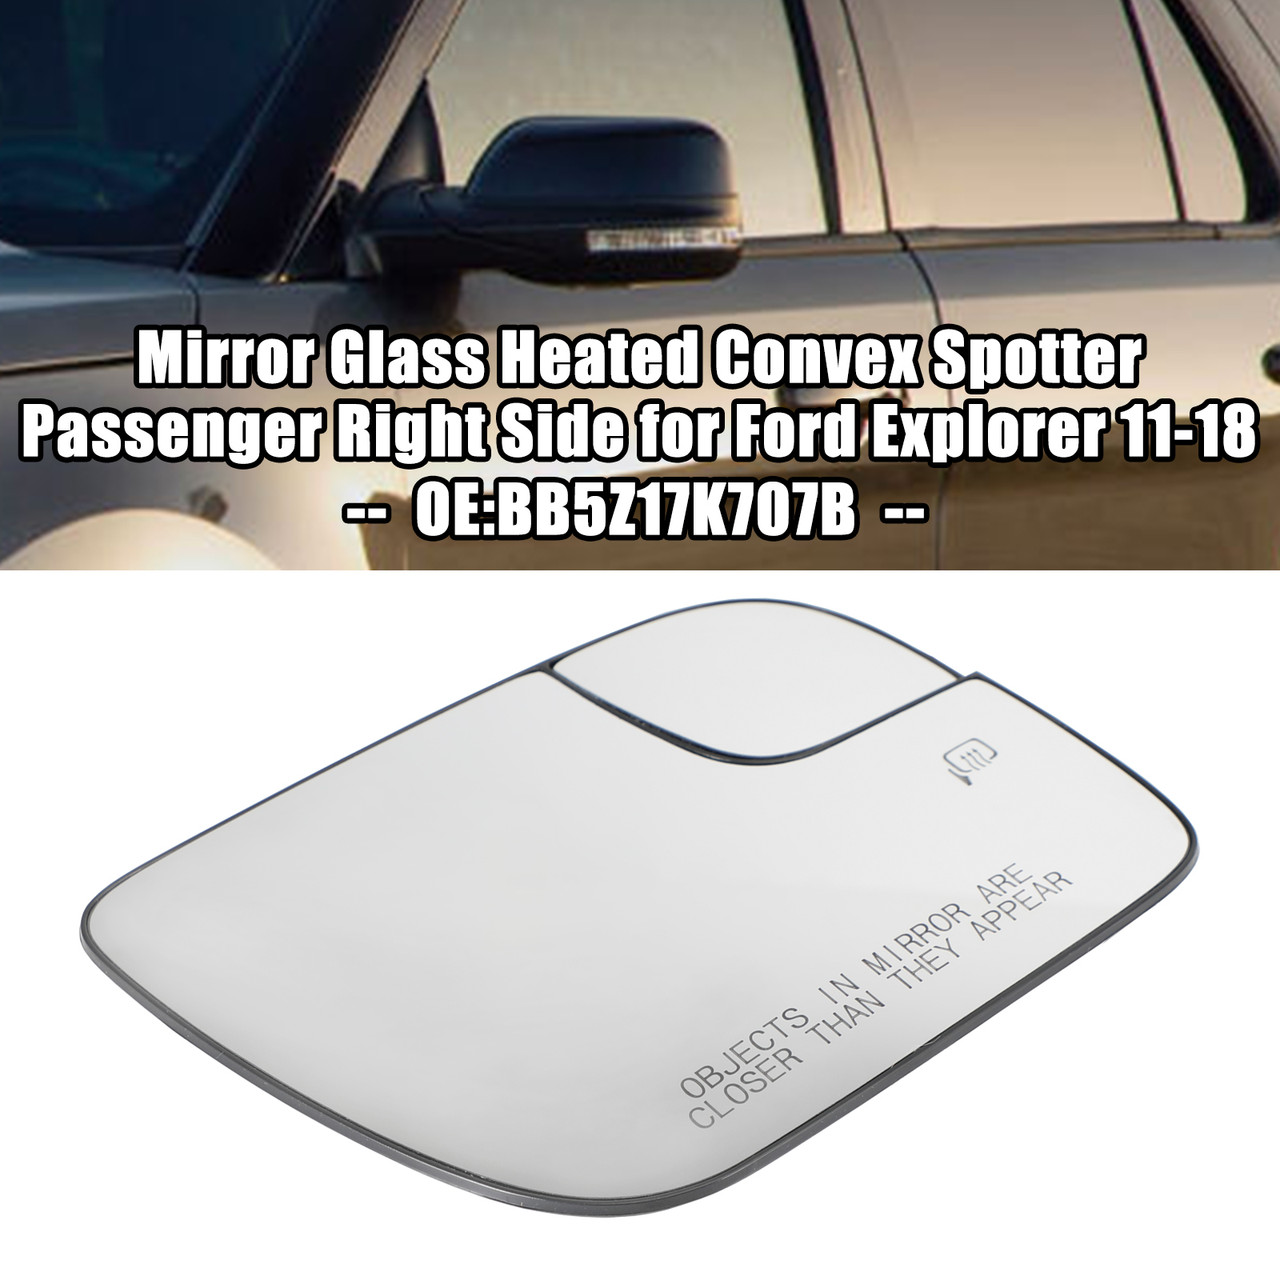 Mirror Glass Heated Convex Spotter Passenger Right Side for Ford Explorer 11-18